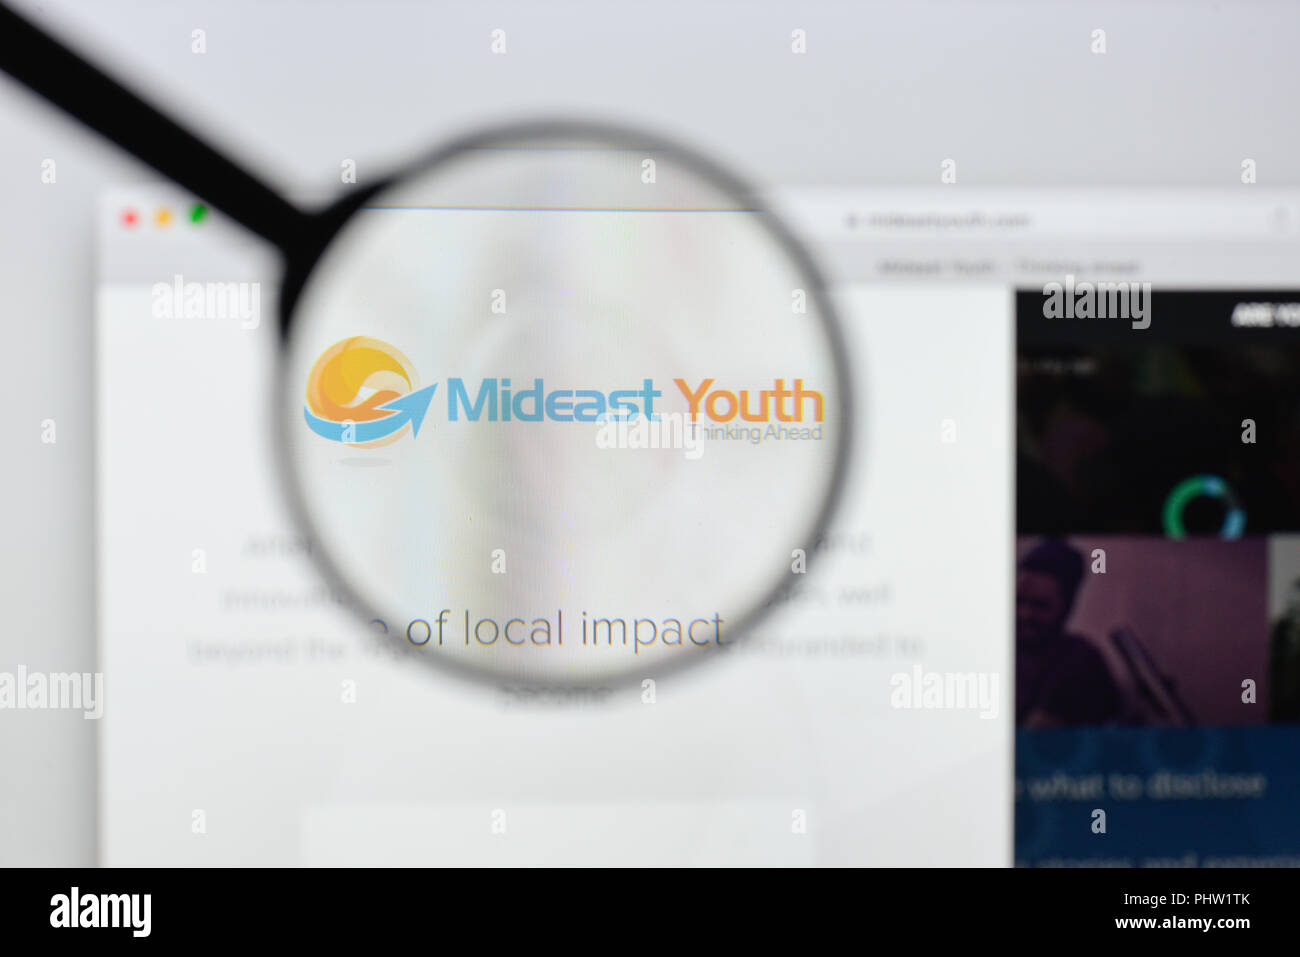 Milan, Italy - August 20, 2018: Mideast Youth website homepage. Mideast Youth logo visible. Stock Photo